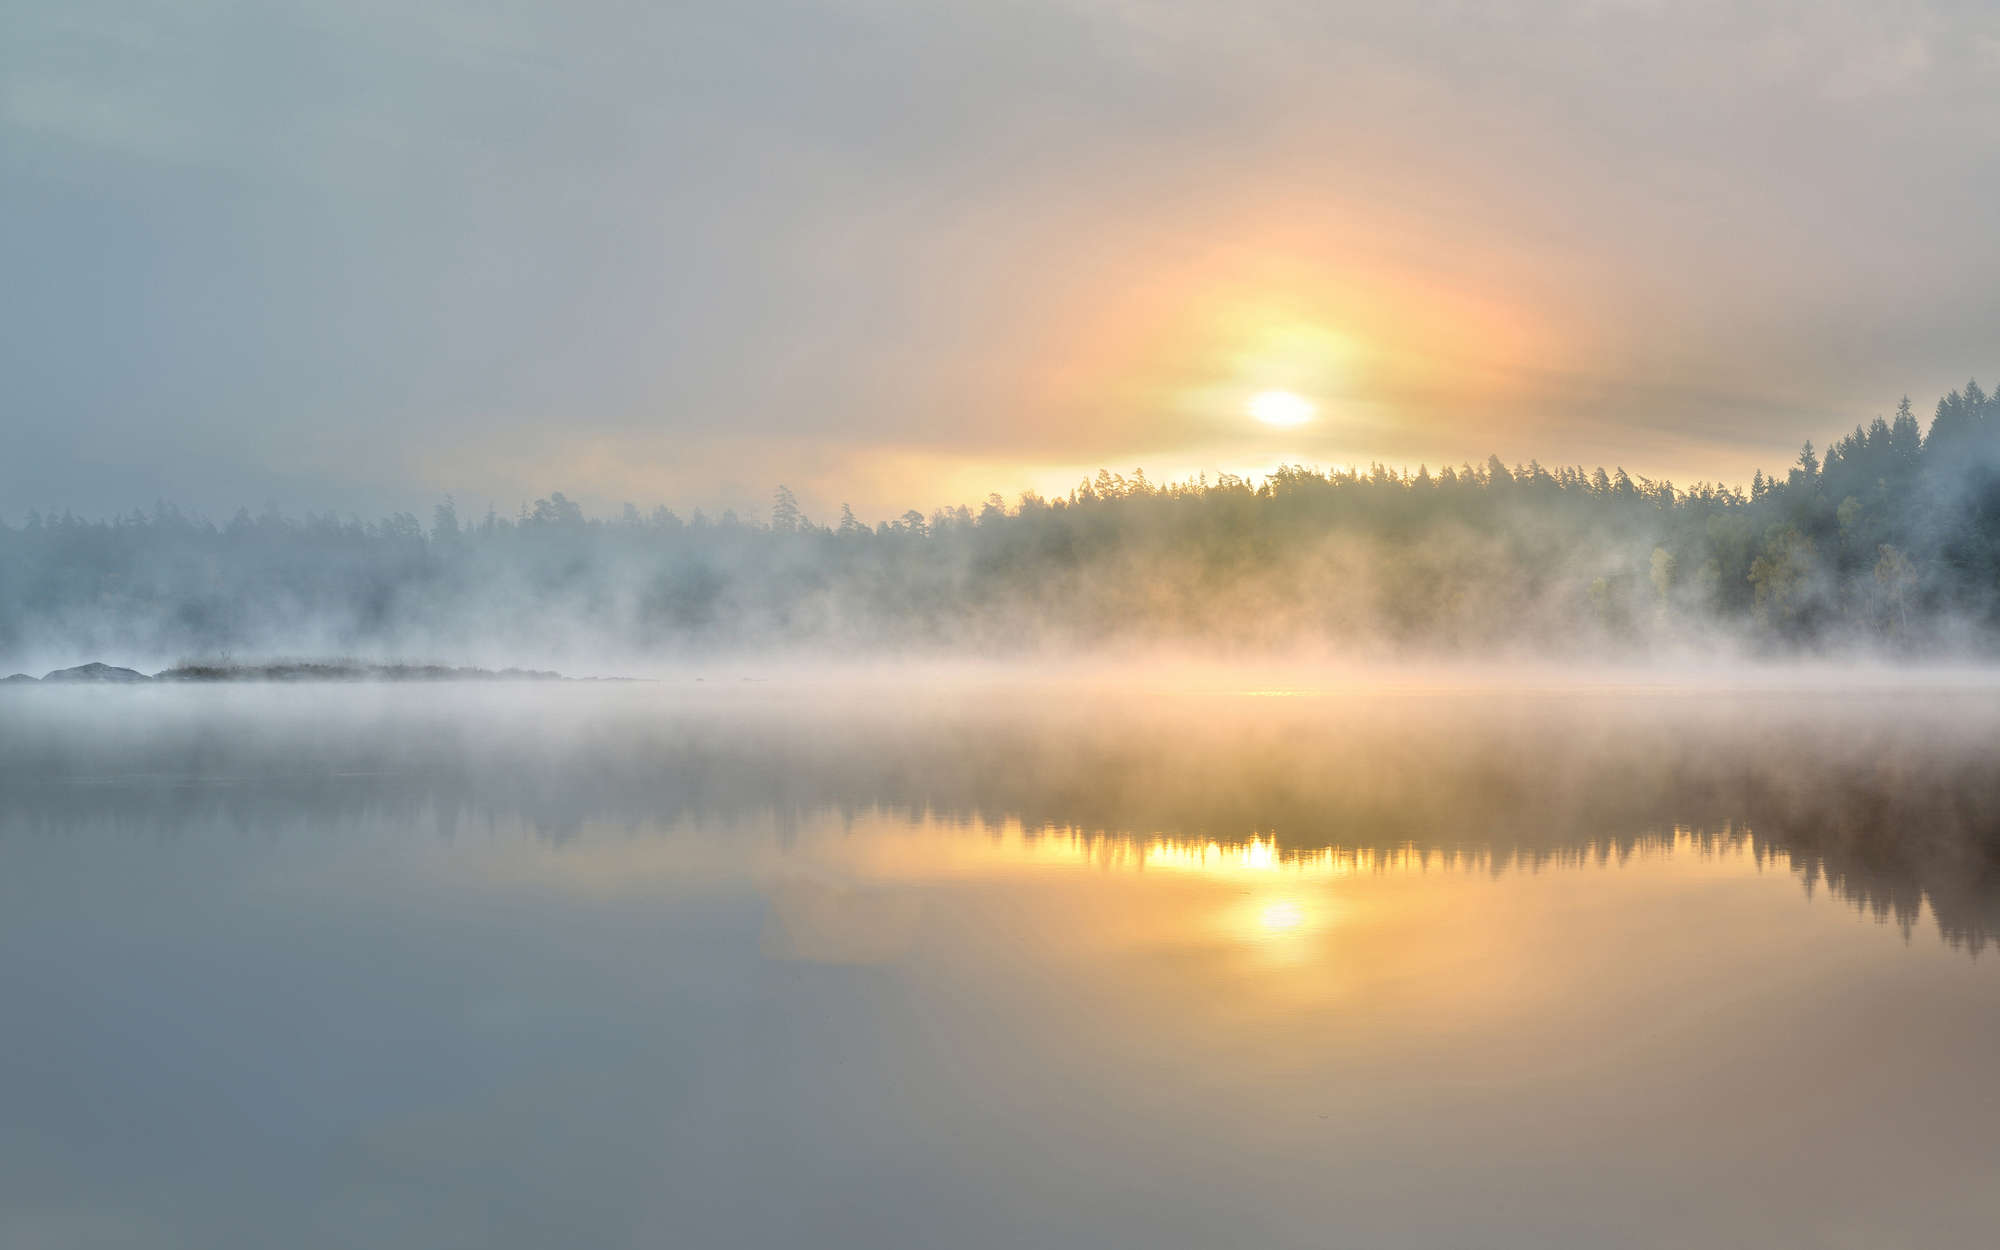             Photo wallpaper foggy morning at the lake - mother of pearl smooth fleece
        